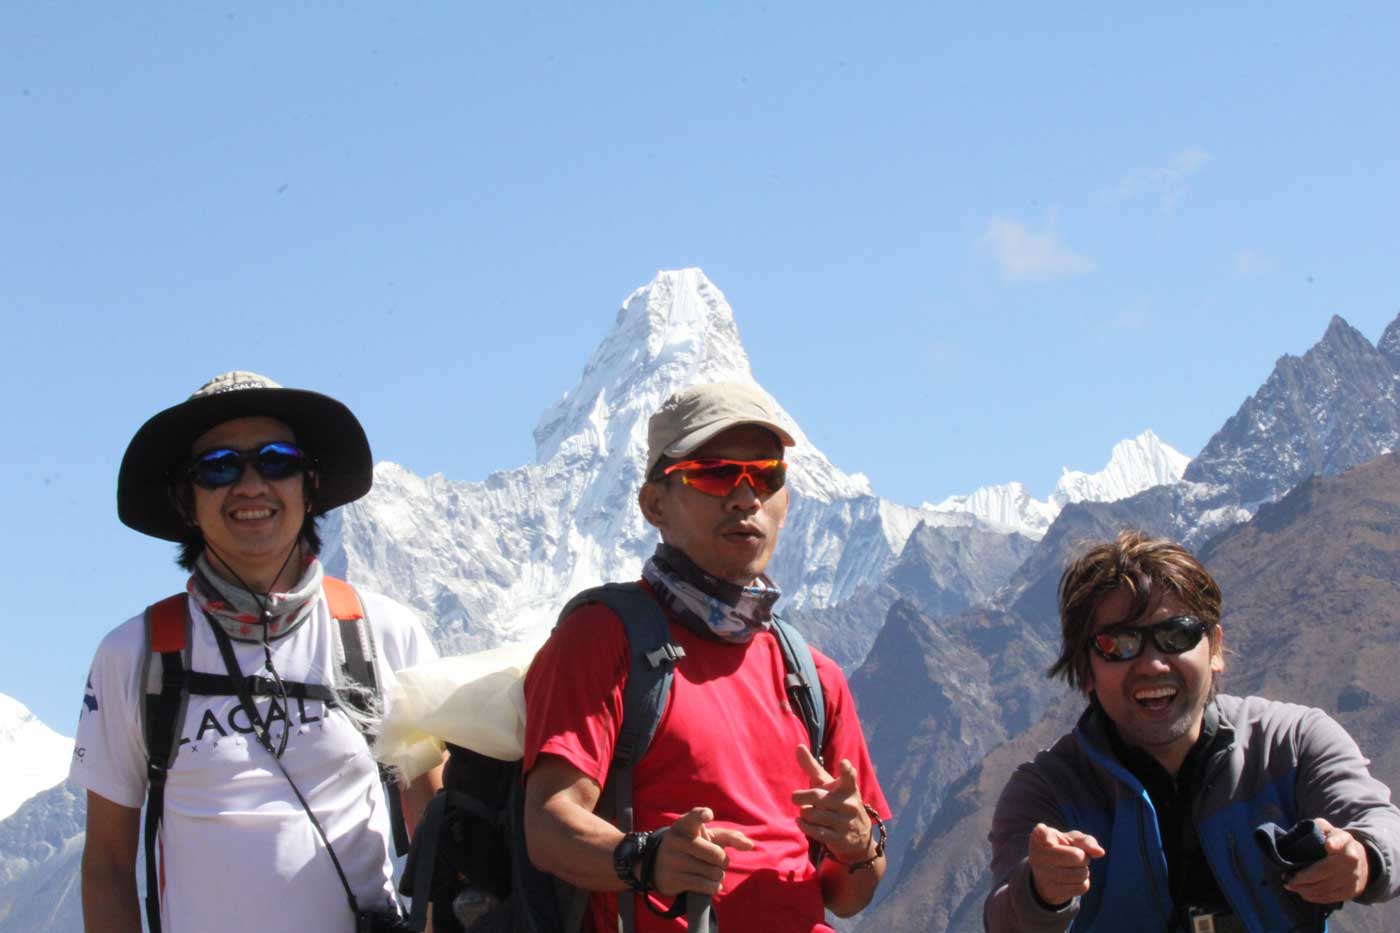 The Ama Dablam Expedition Team: Dennis Lopez, Romi, and Henry Nakpil   